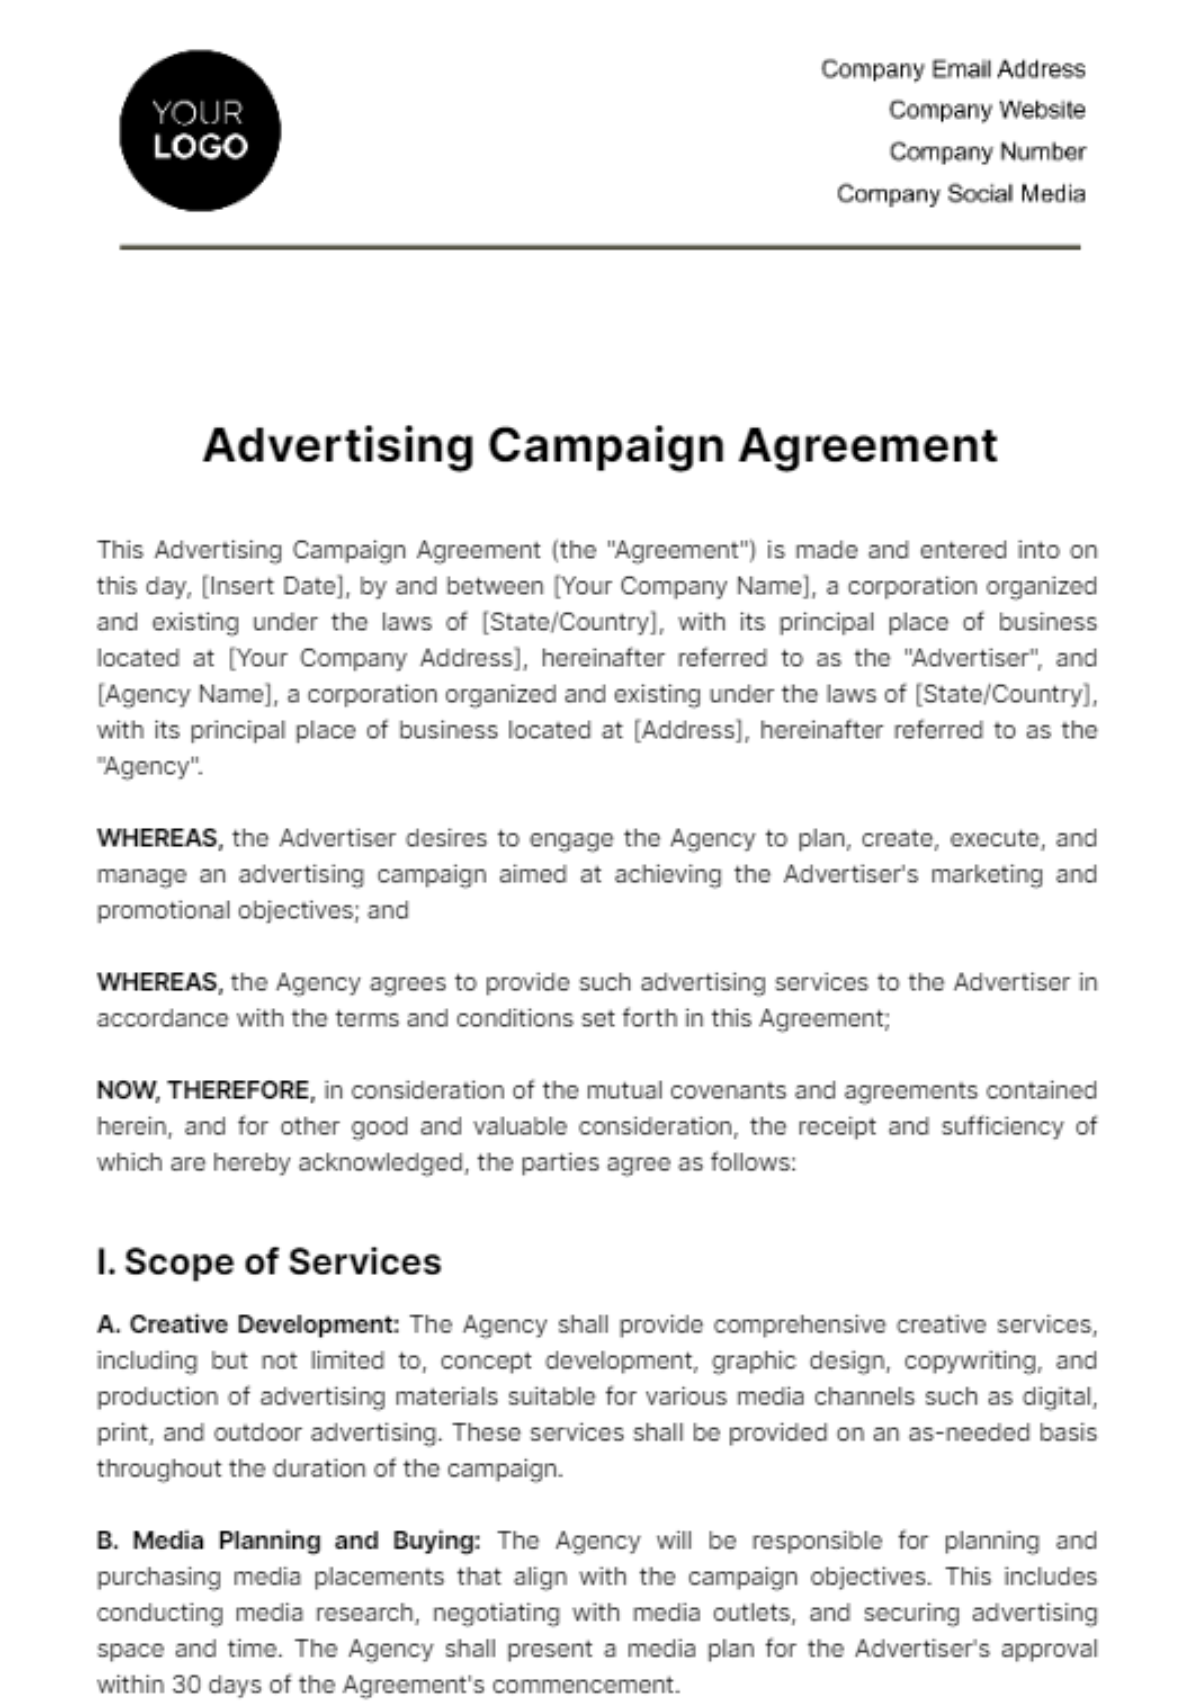 Free Advertising Campaign Agreement Template